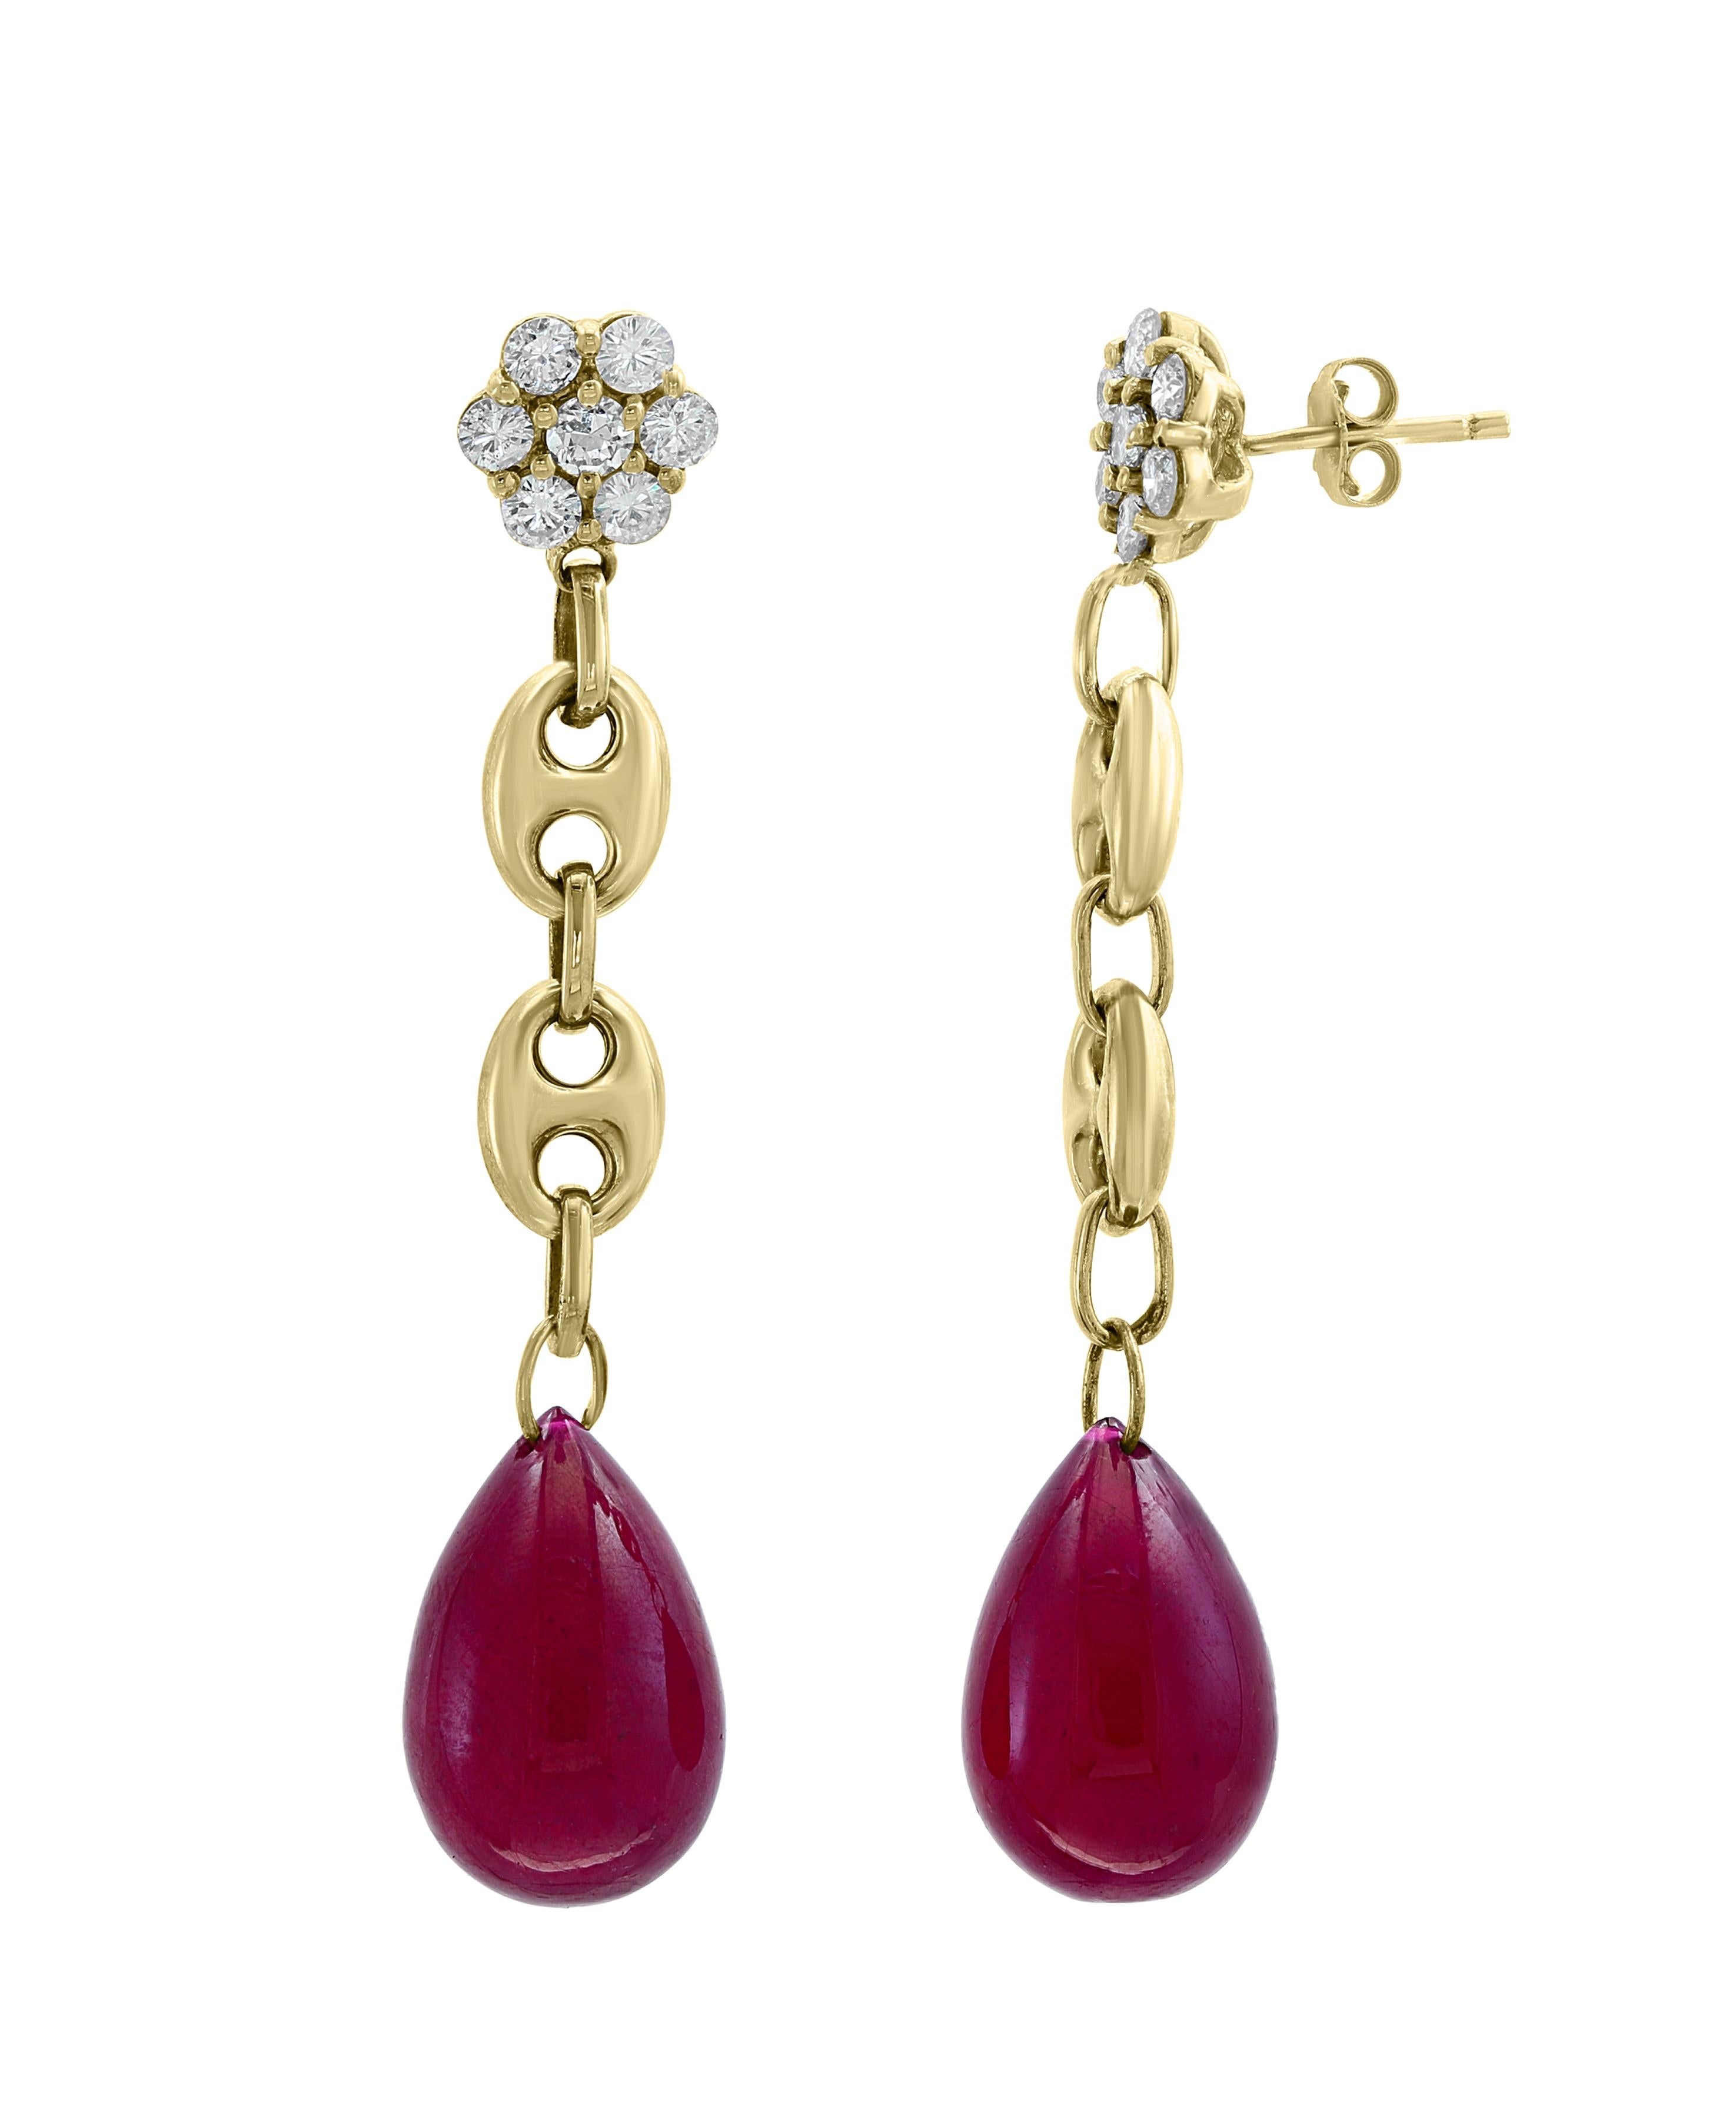 45 Carats  of two  Ruby  drops and Diamond  Hanging Earrings 14 K Yellow Gold
This exquisite pair of earrings are beautifully crafted with 14 karat Yellow gold  weighing    
 15 grams
One large drop of Ruby approximately 23 ct each  Hanging at the 